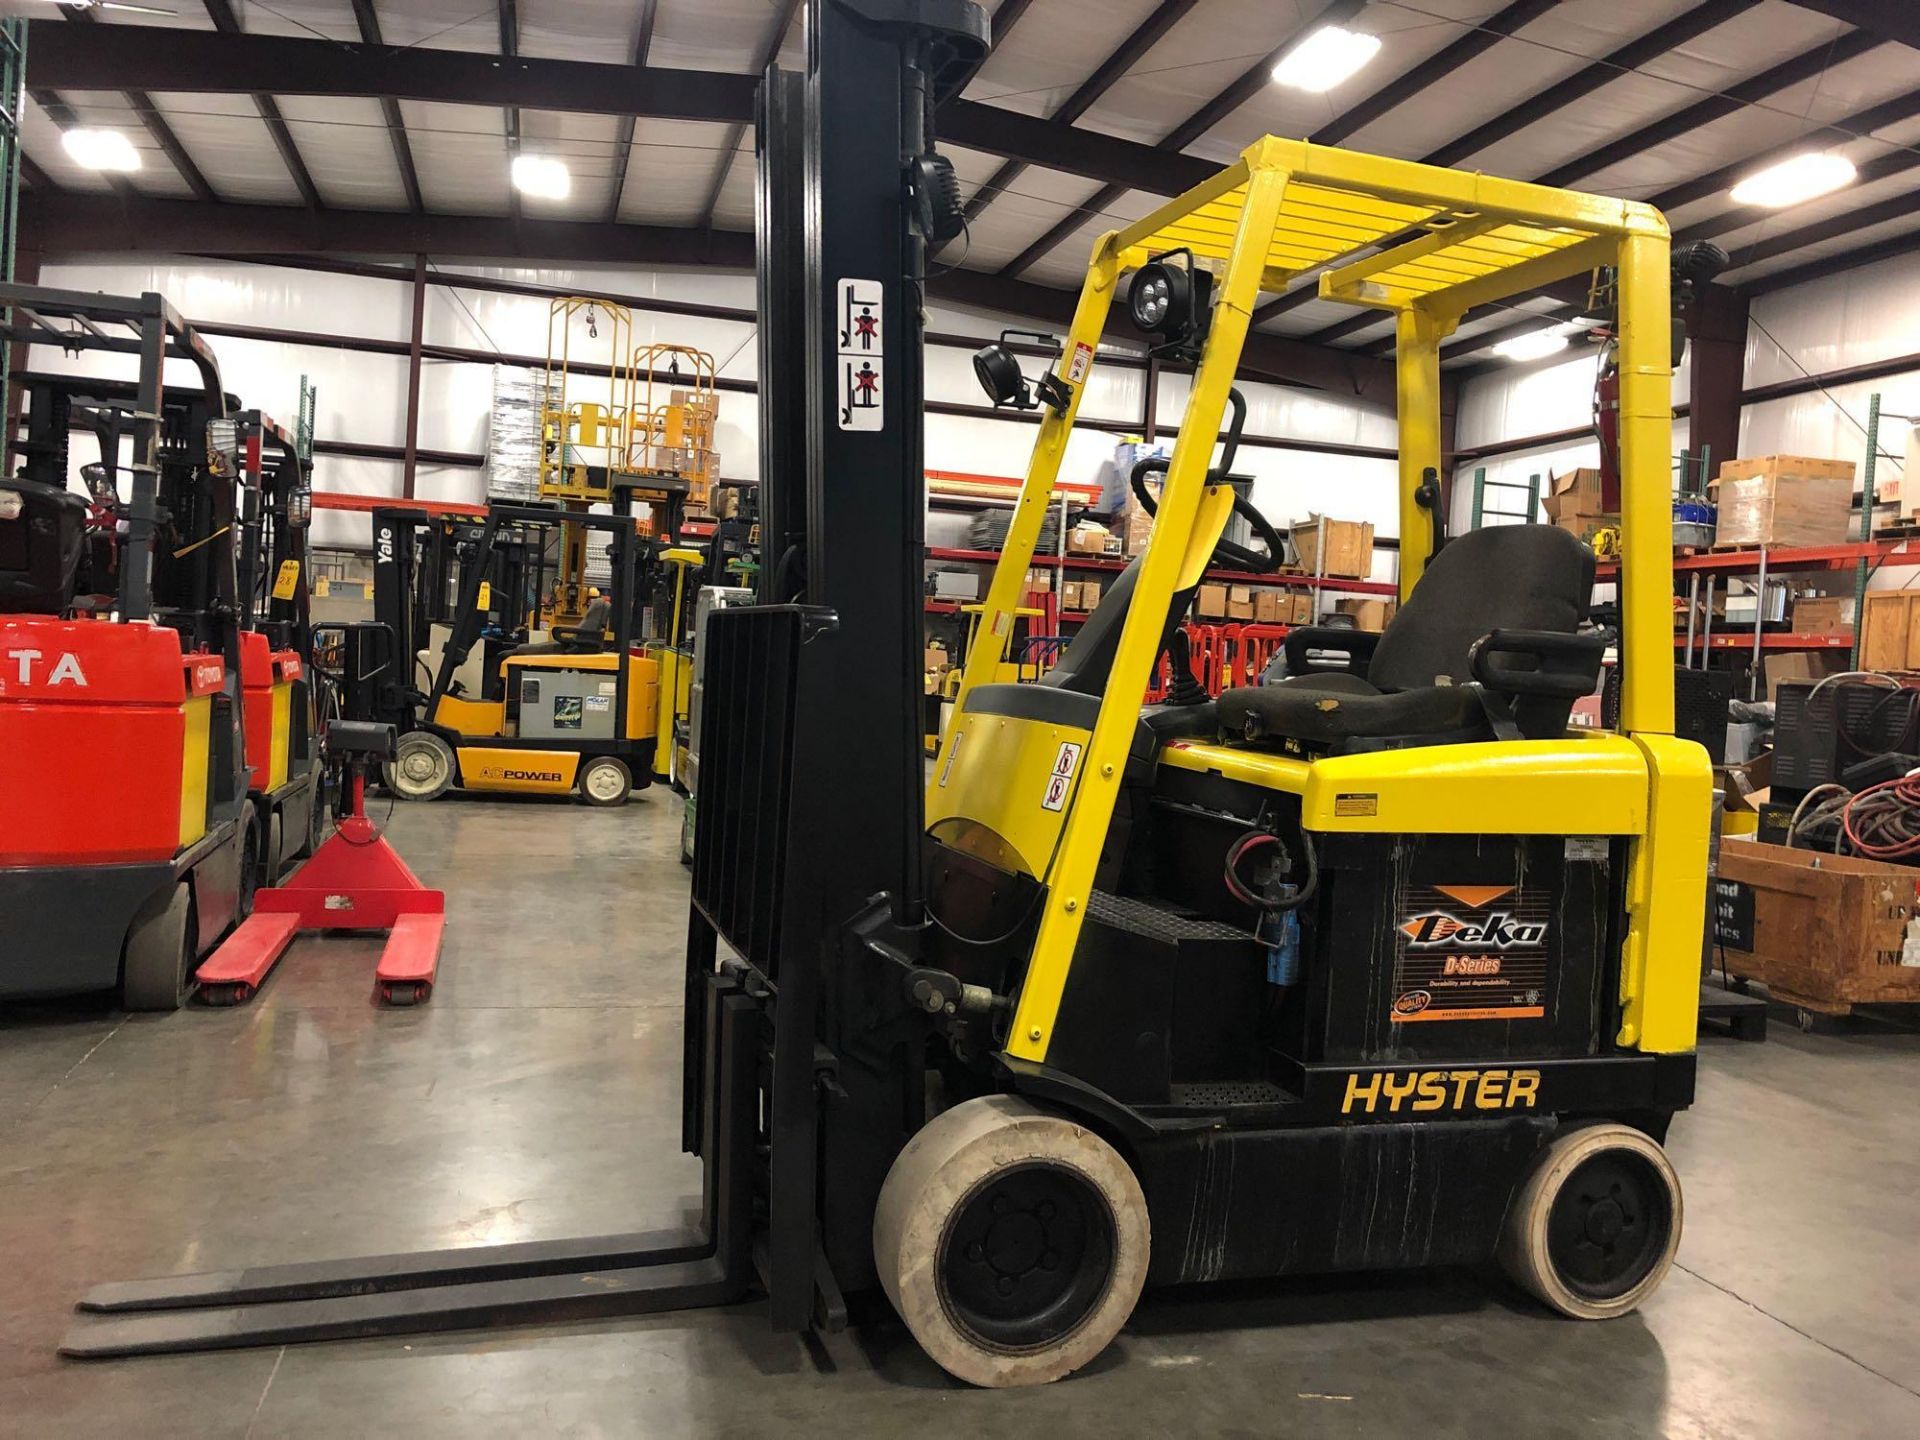 HYSTER ELECTRIC FORKLIFT MODEL E40XM25, 4,000 LB CAPACITY, 212.6" HEIGHT CAPACITY